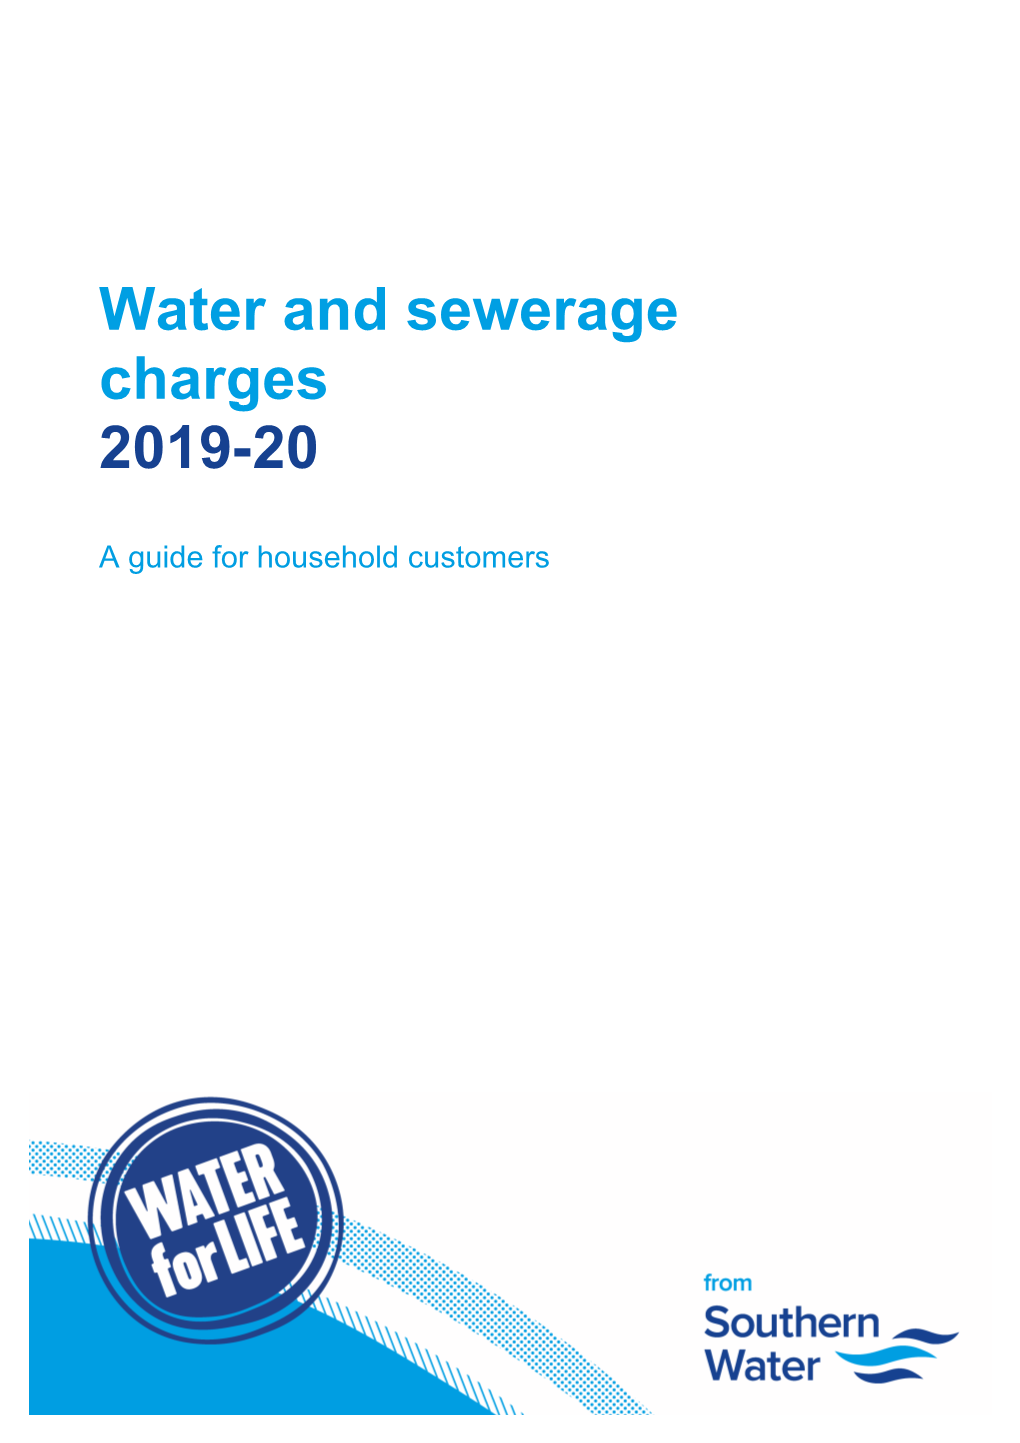 Water and Sewerage Charges Guide 19-20